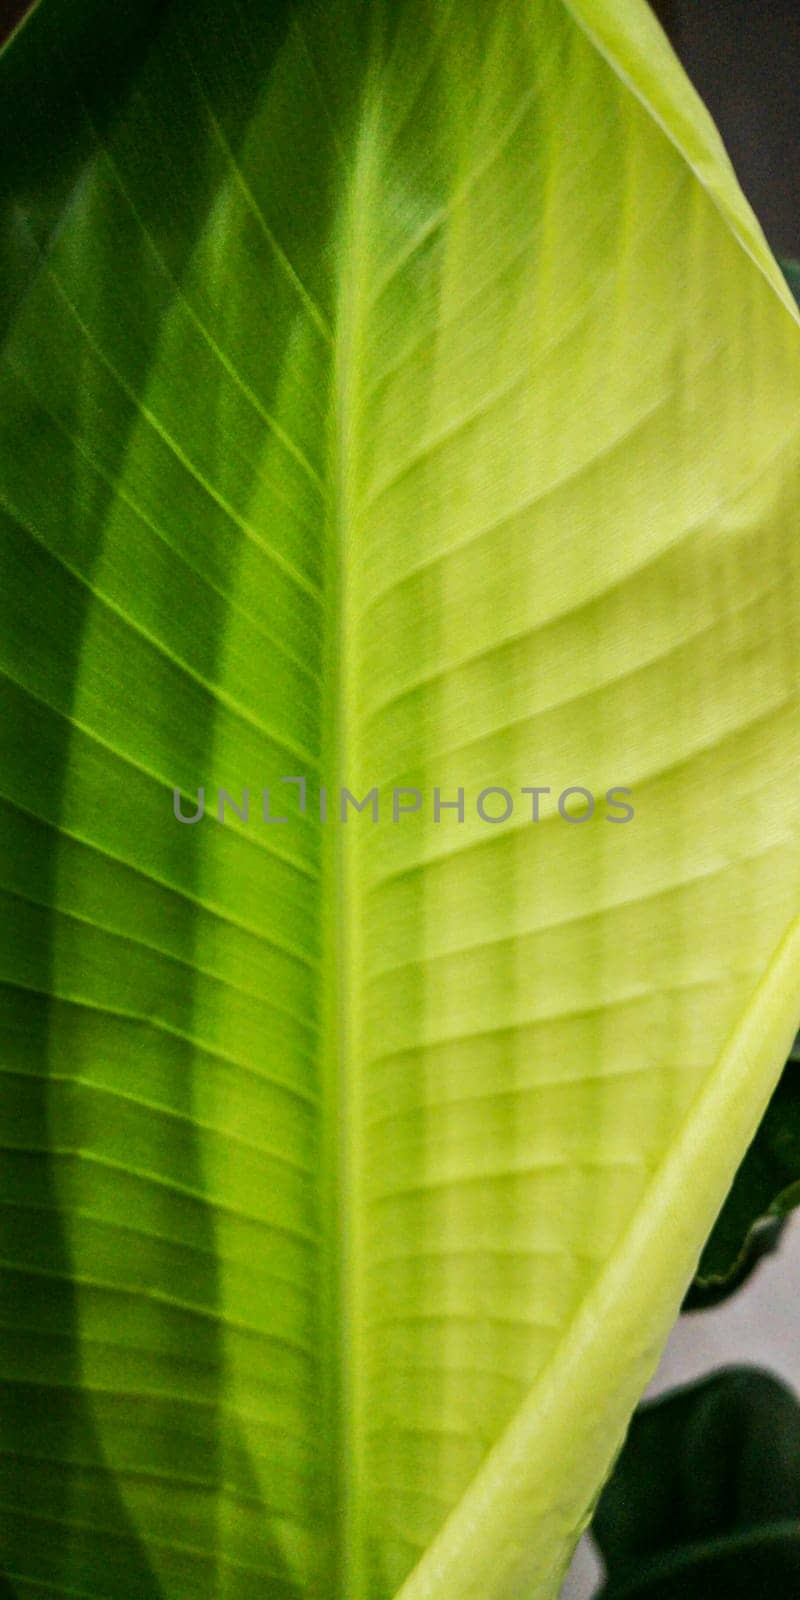 A newly blossomed tropical palm leaf with gradation of shades of green. mobile screen saver, story template, tropical background.